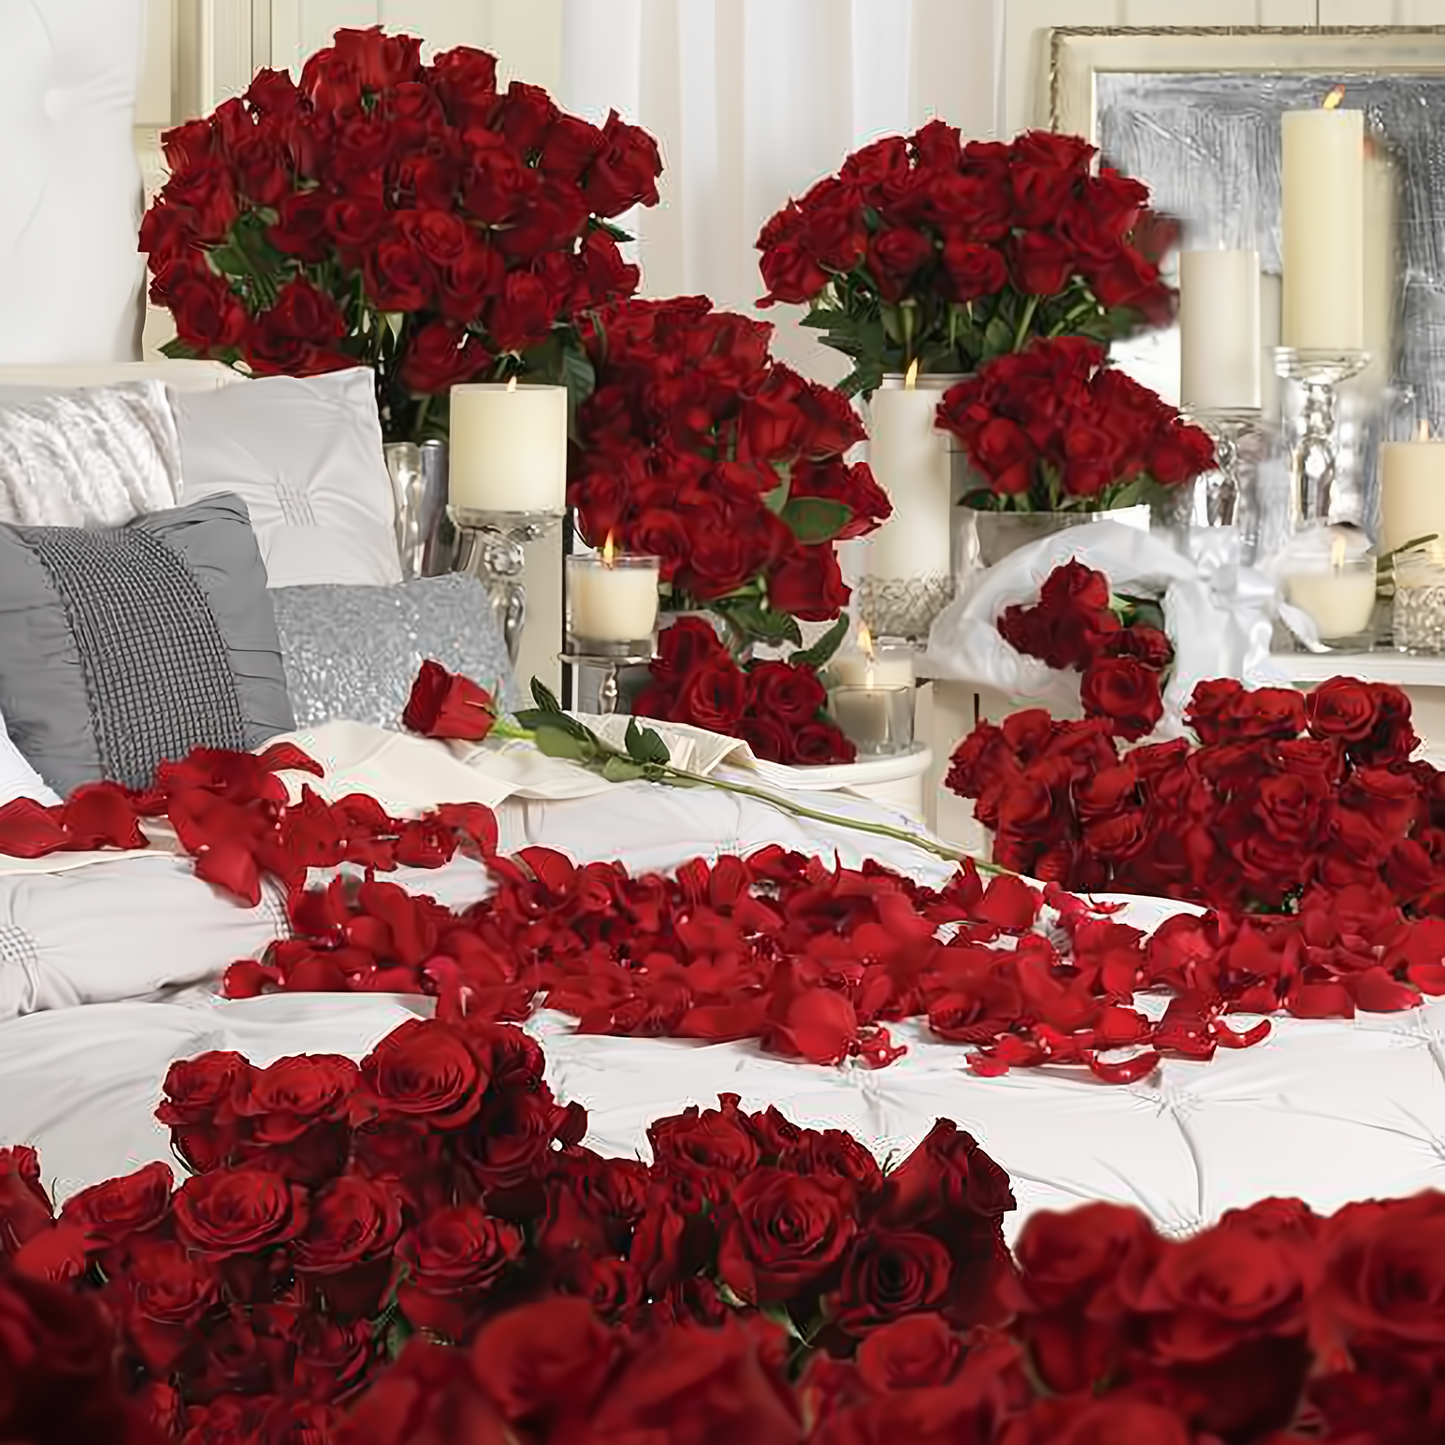 NYC Flower Delivery - 1,000 Long Stem Red Roses - Roses